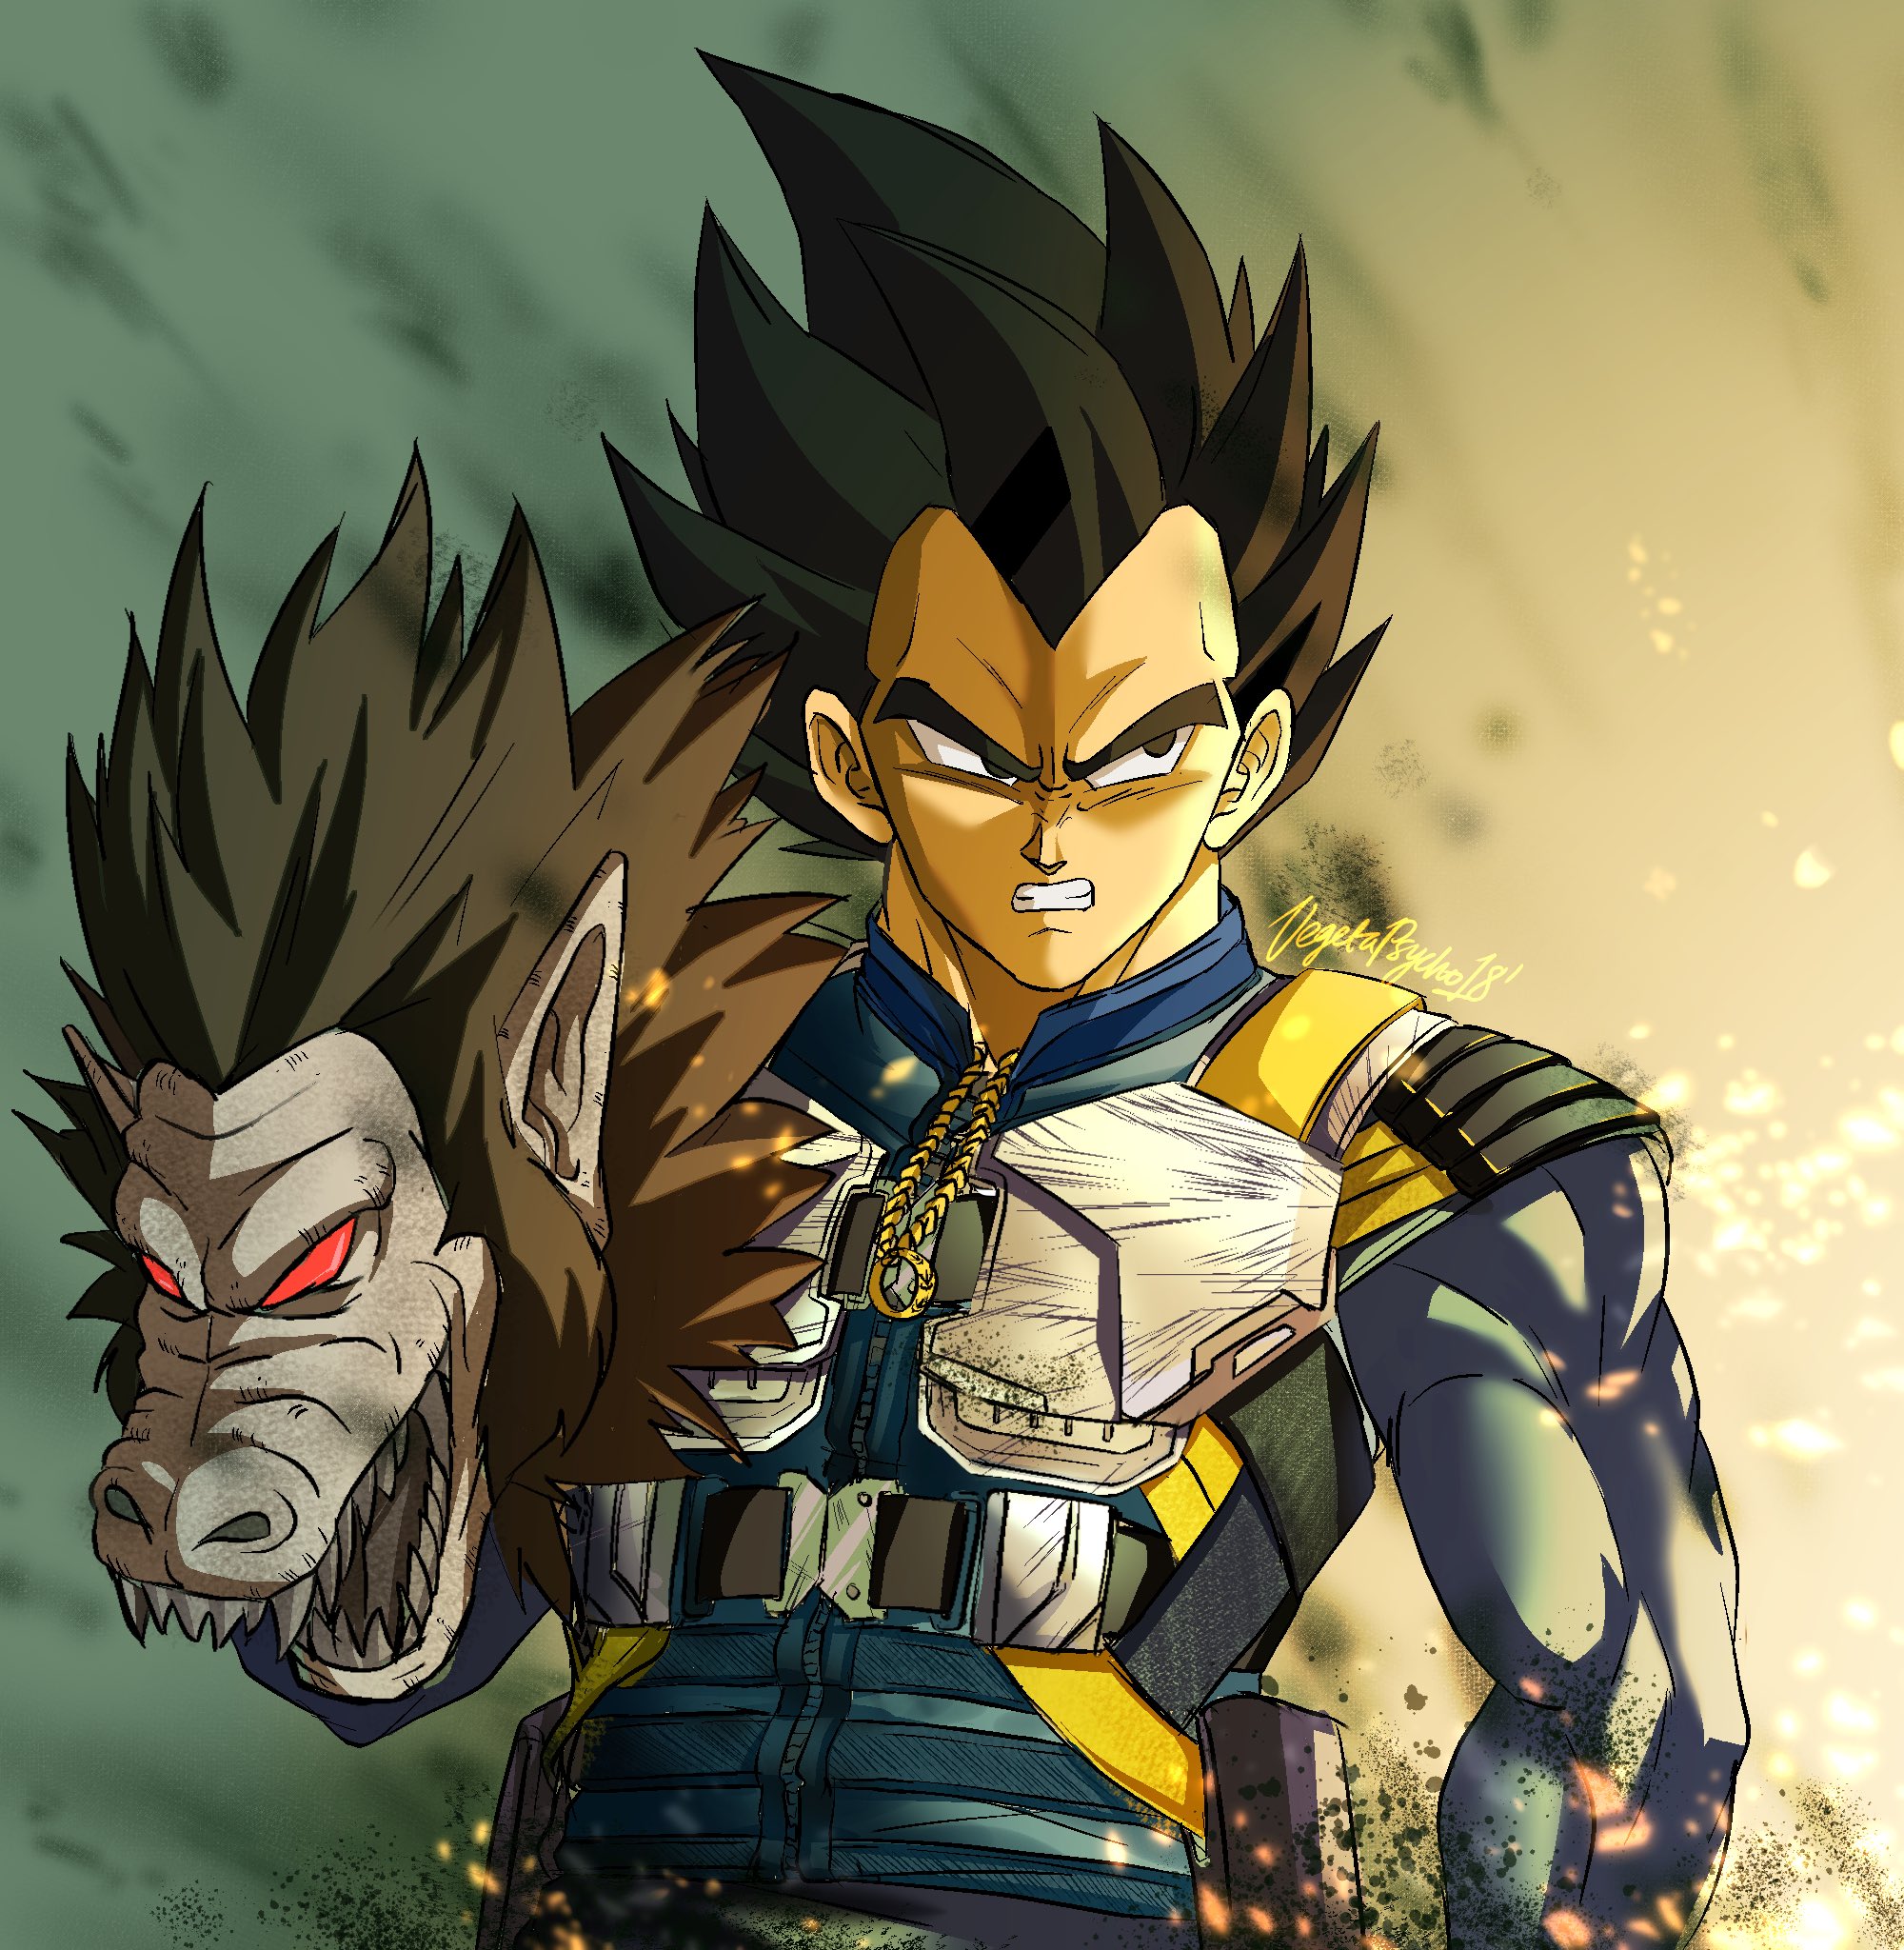 VEGETApsycho on Twitter "I can't unsee Vegeta's armor